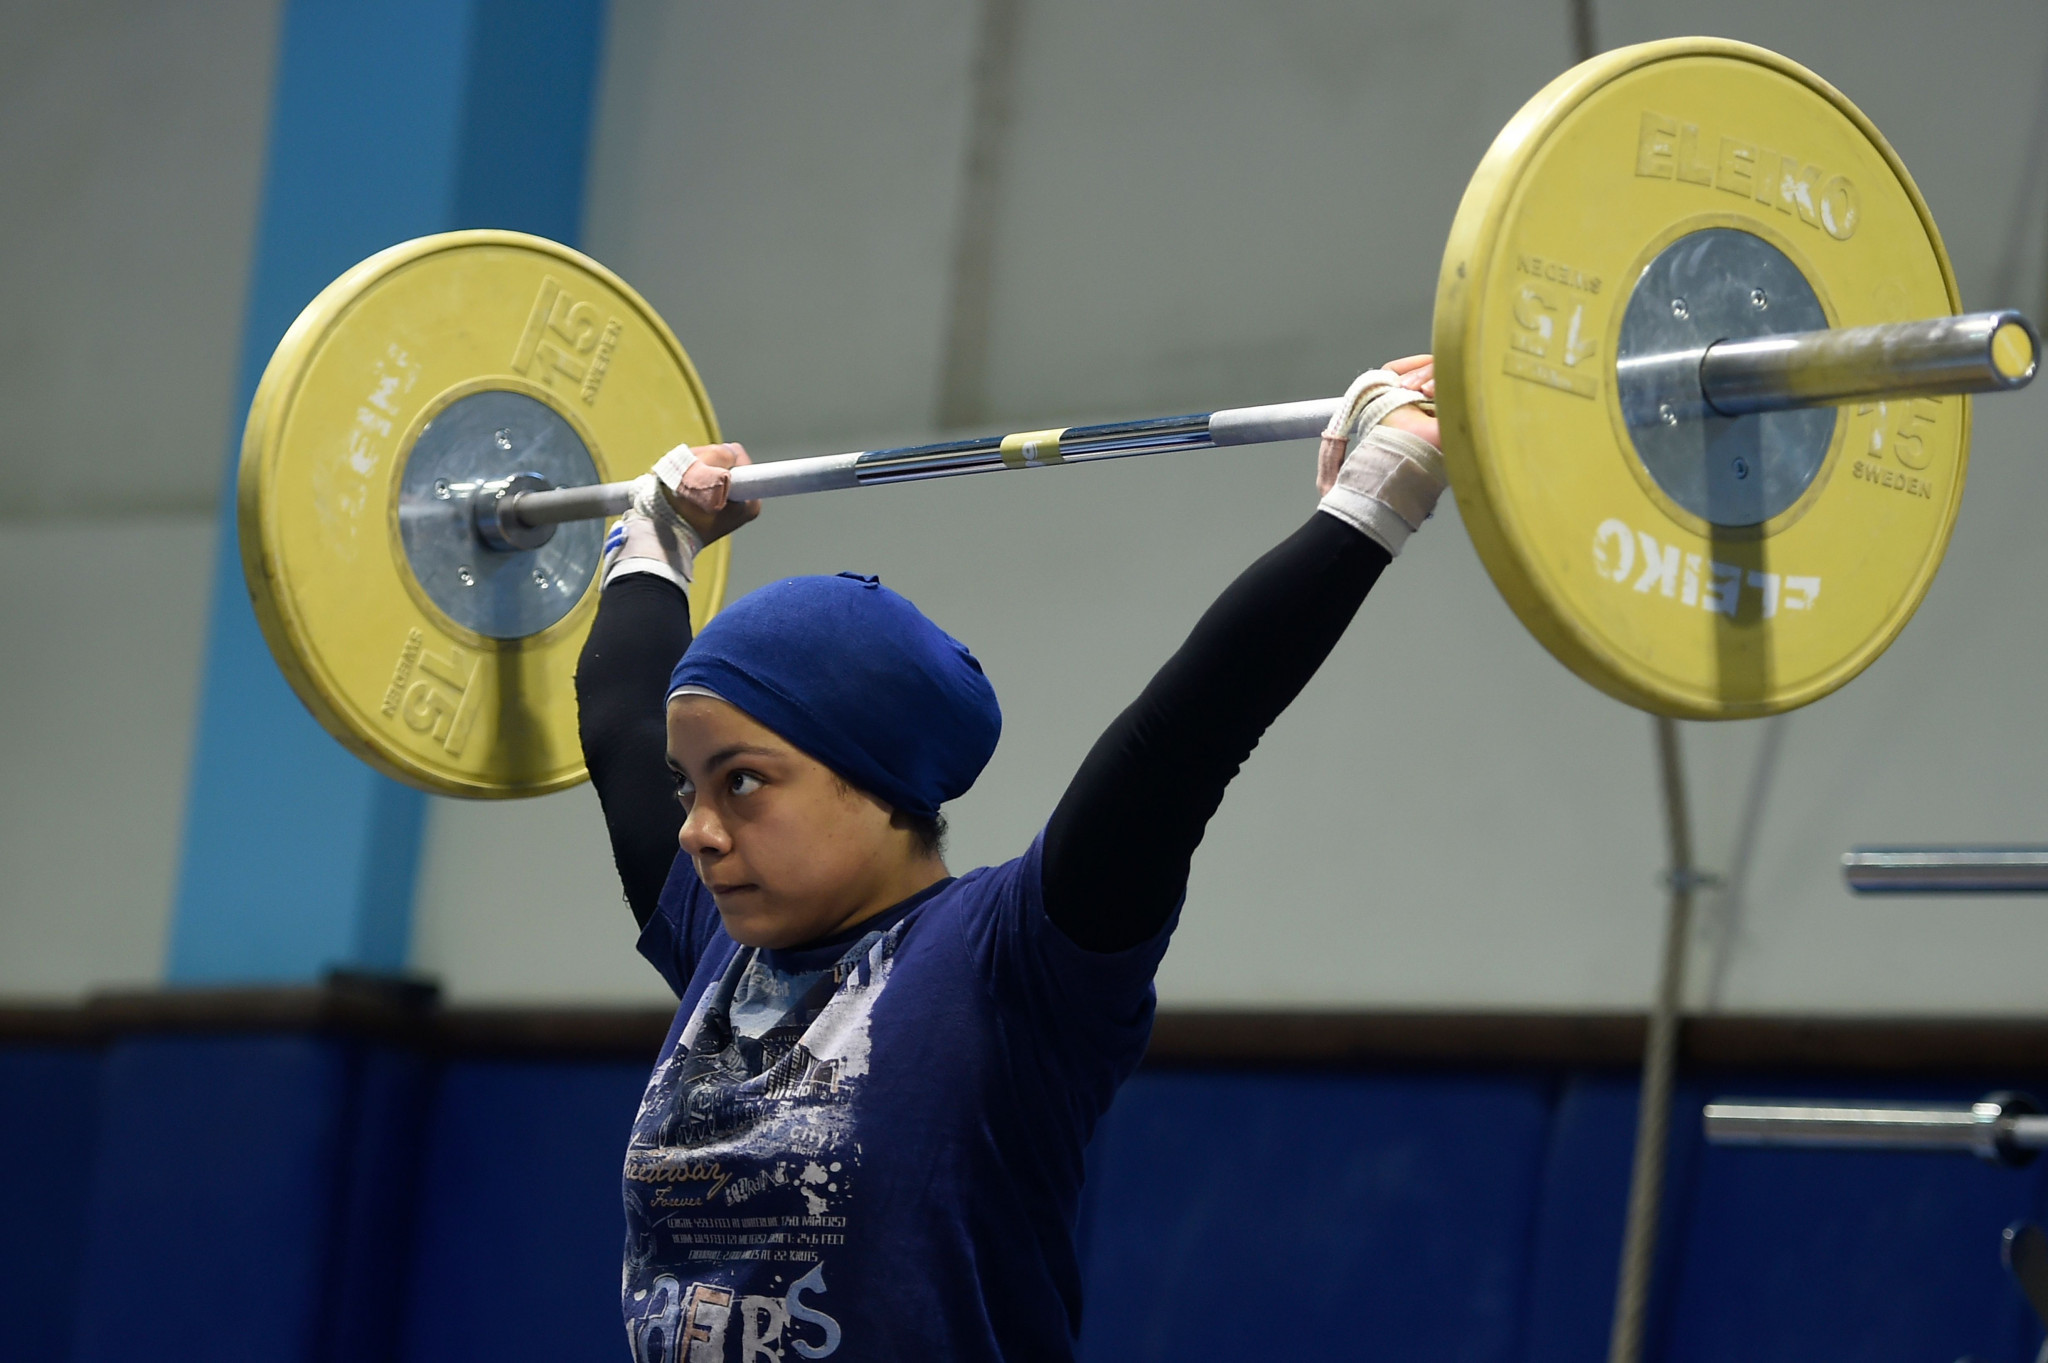 Egypt’s Sara Ahmed claimed a clean sweep of the women’s 69 kilograms gold medals at the 2018 IWF Junior World Championships in Tashkent ©Getty Images